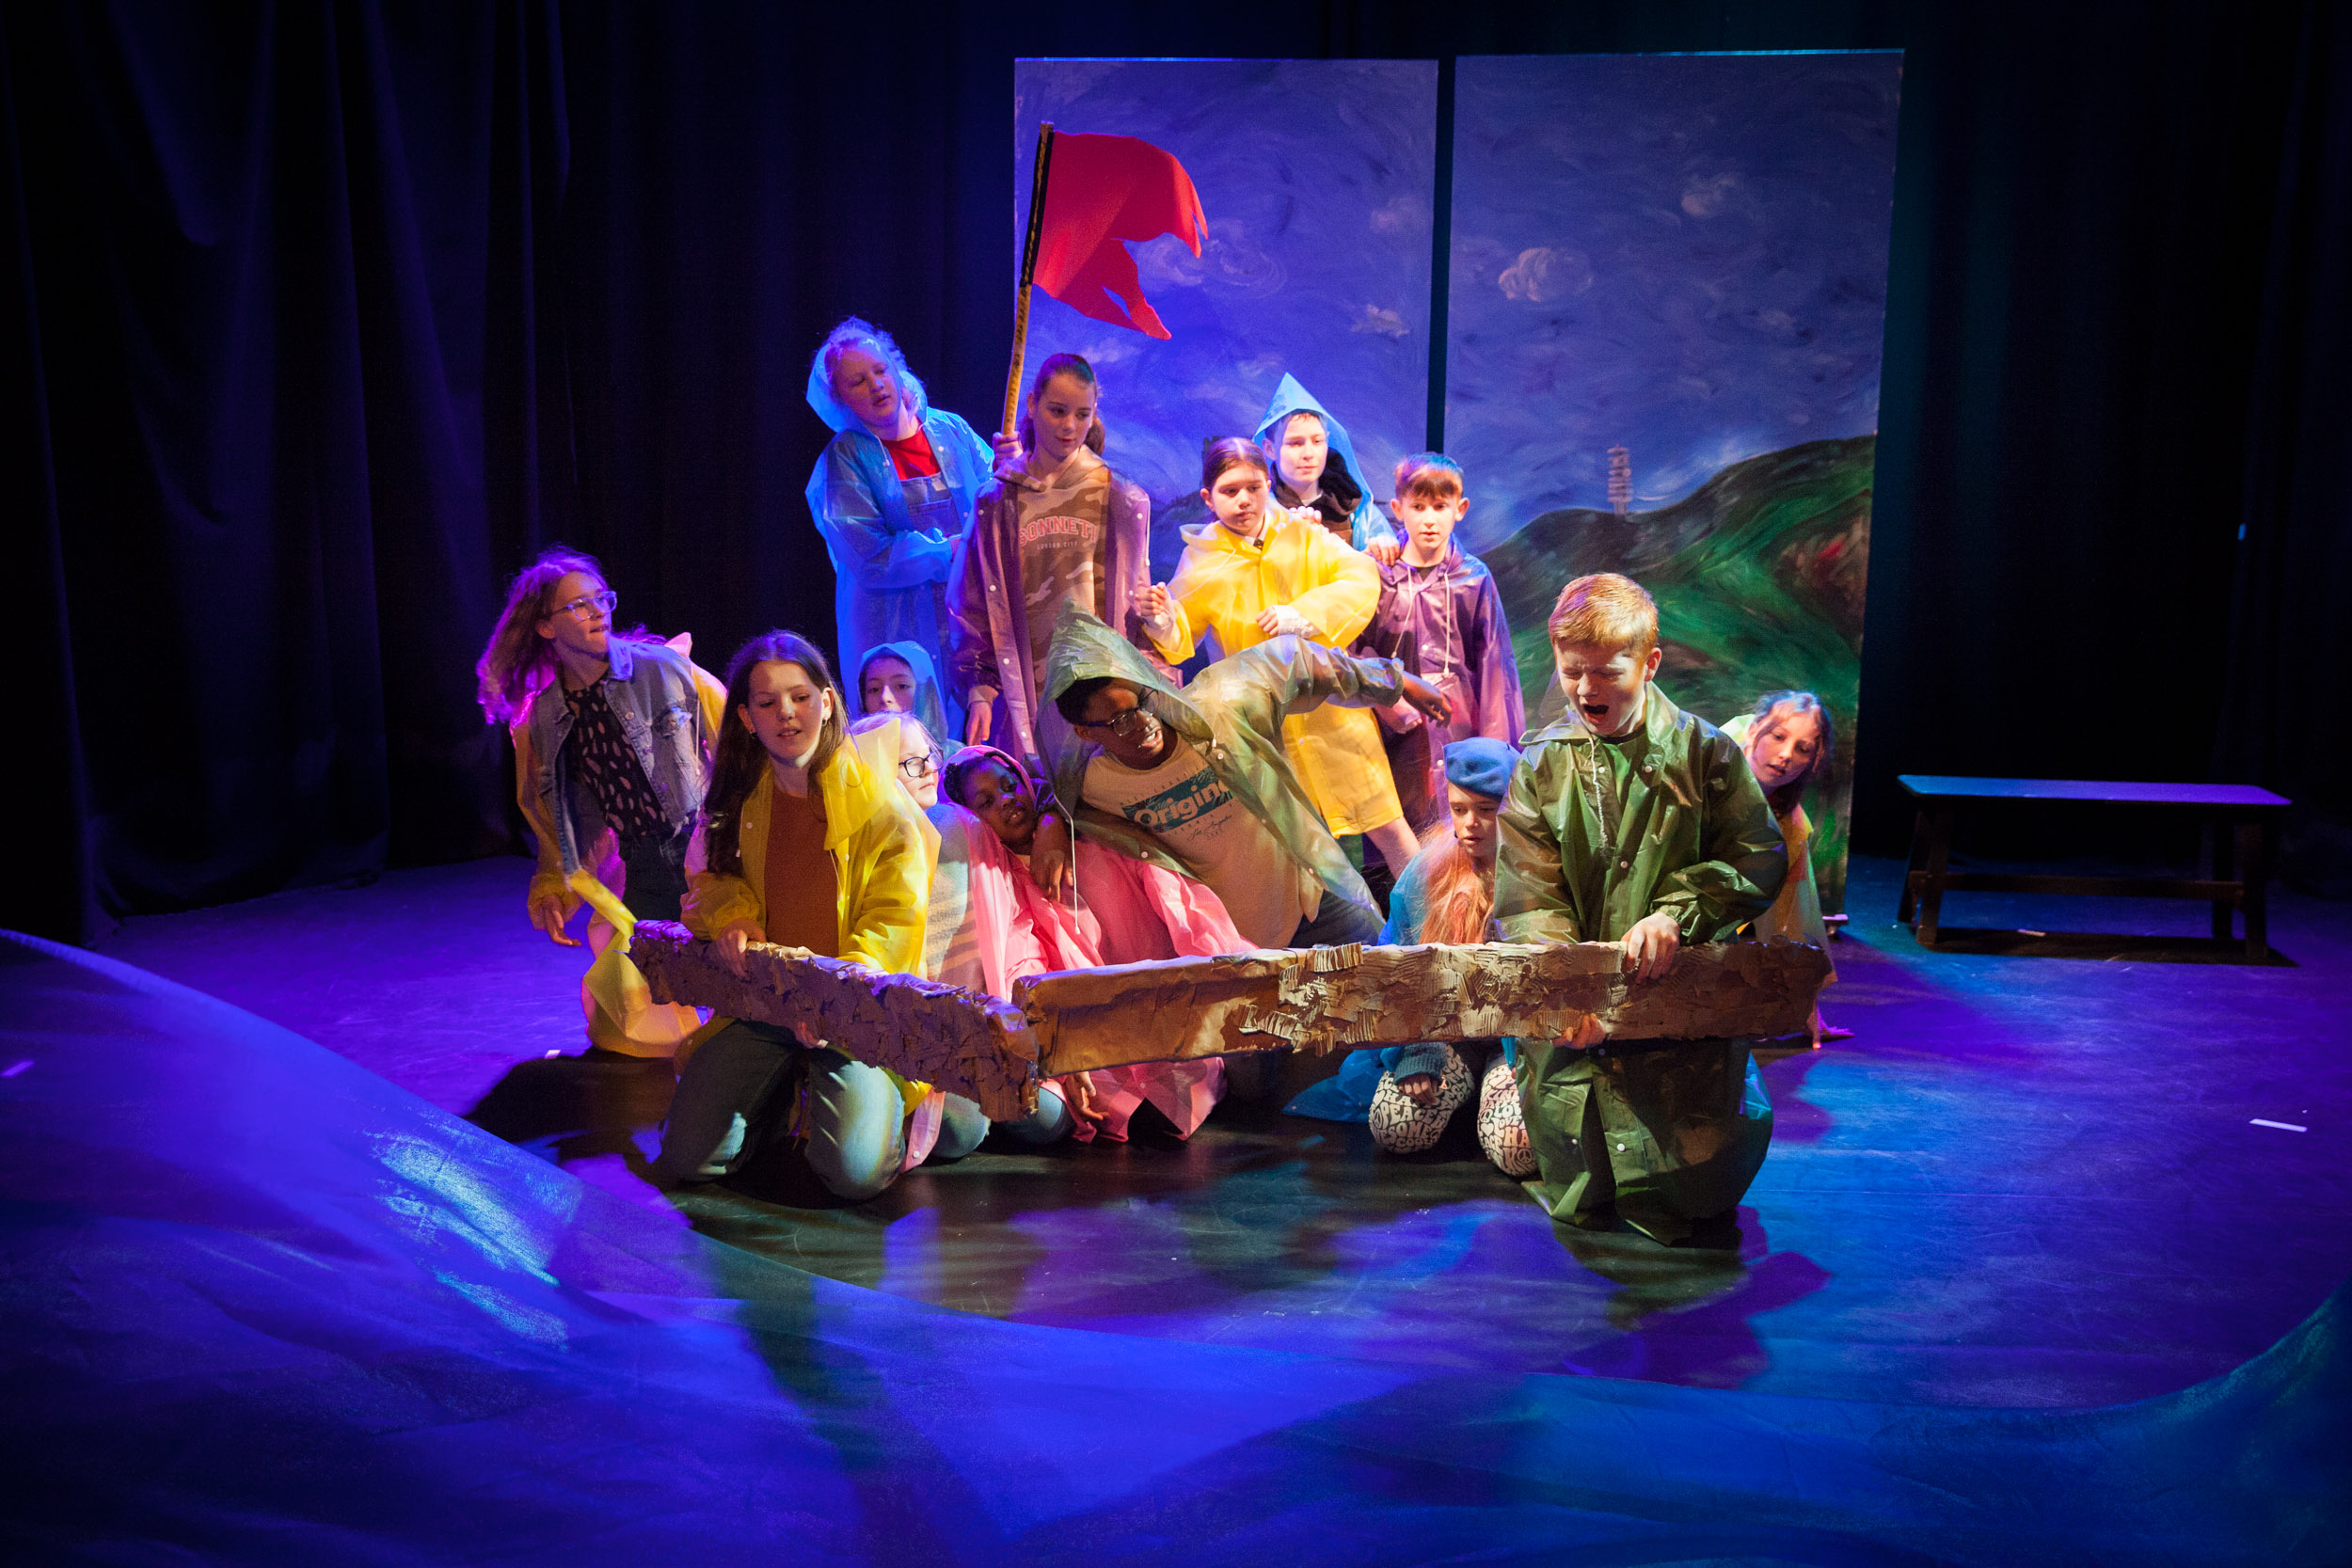 A large group of young actors in raincoats shelter from floods in a home made raft